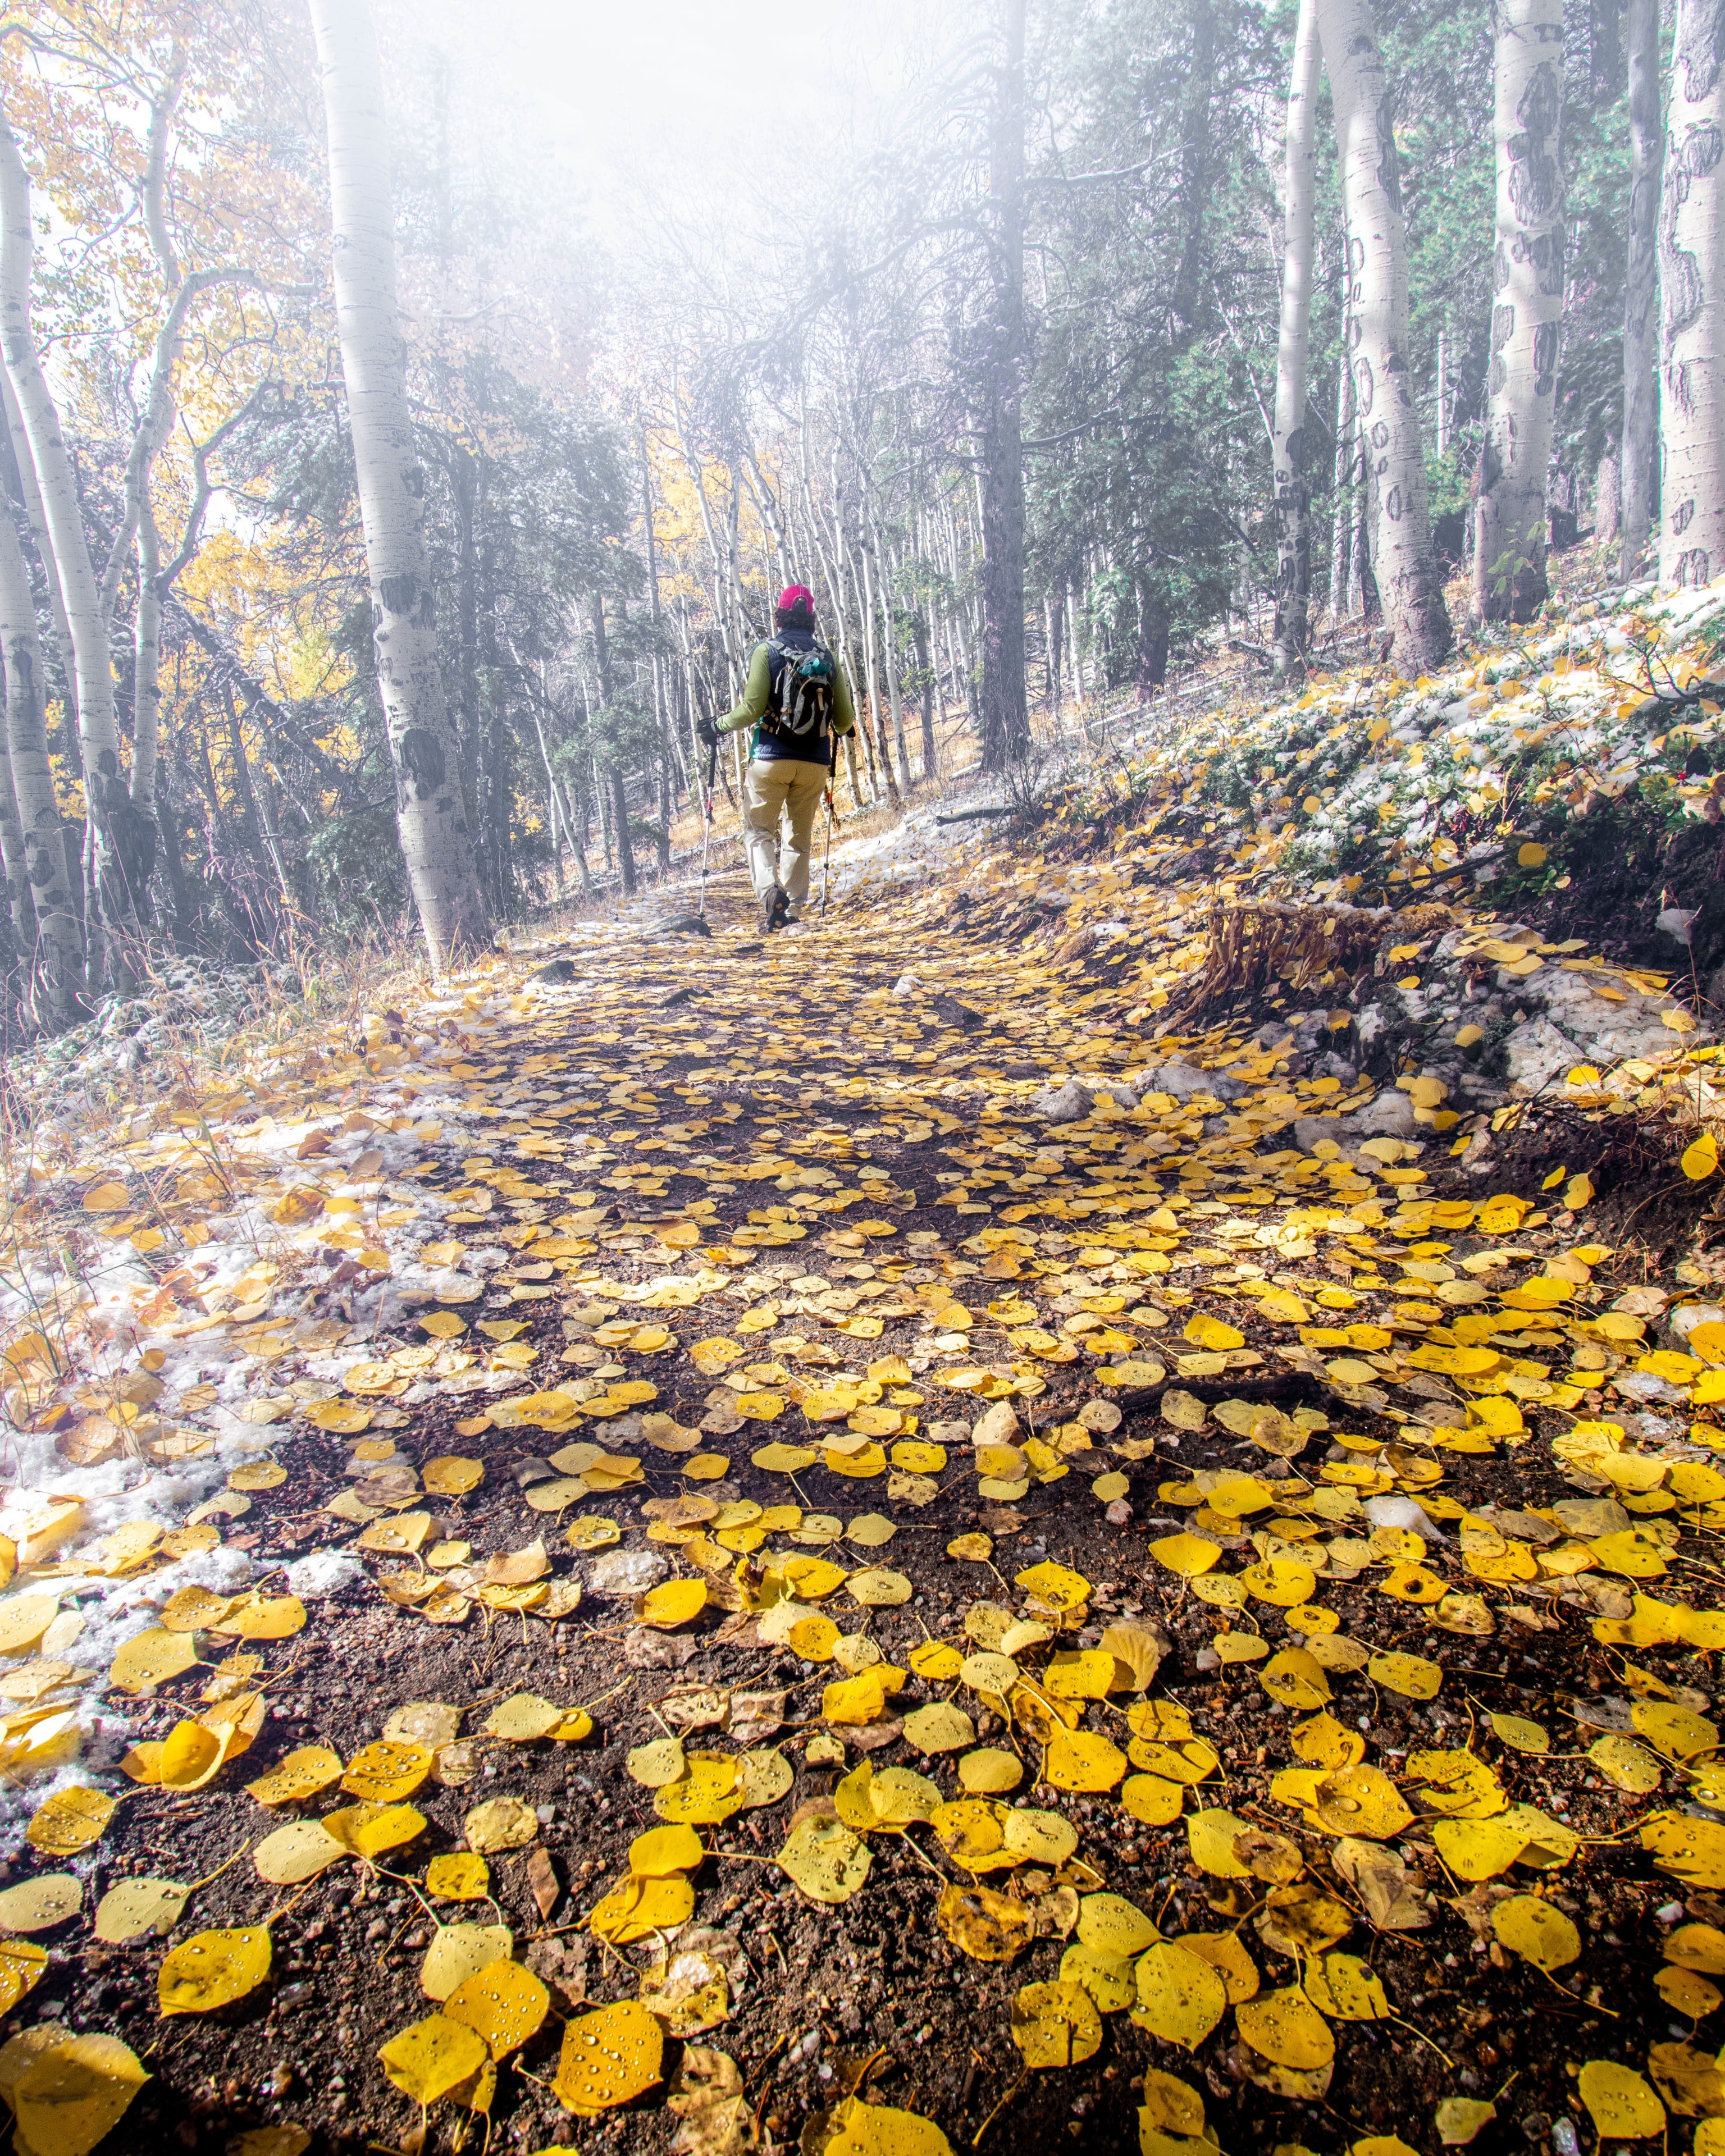 A snowy, foggy, chilly descent of Bergen Peak. With the first snowfall of the season, the aspen leaves came down in a hurry. 